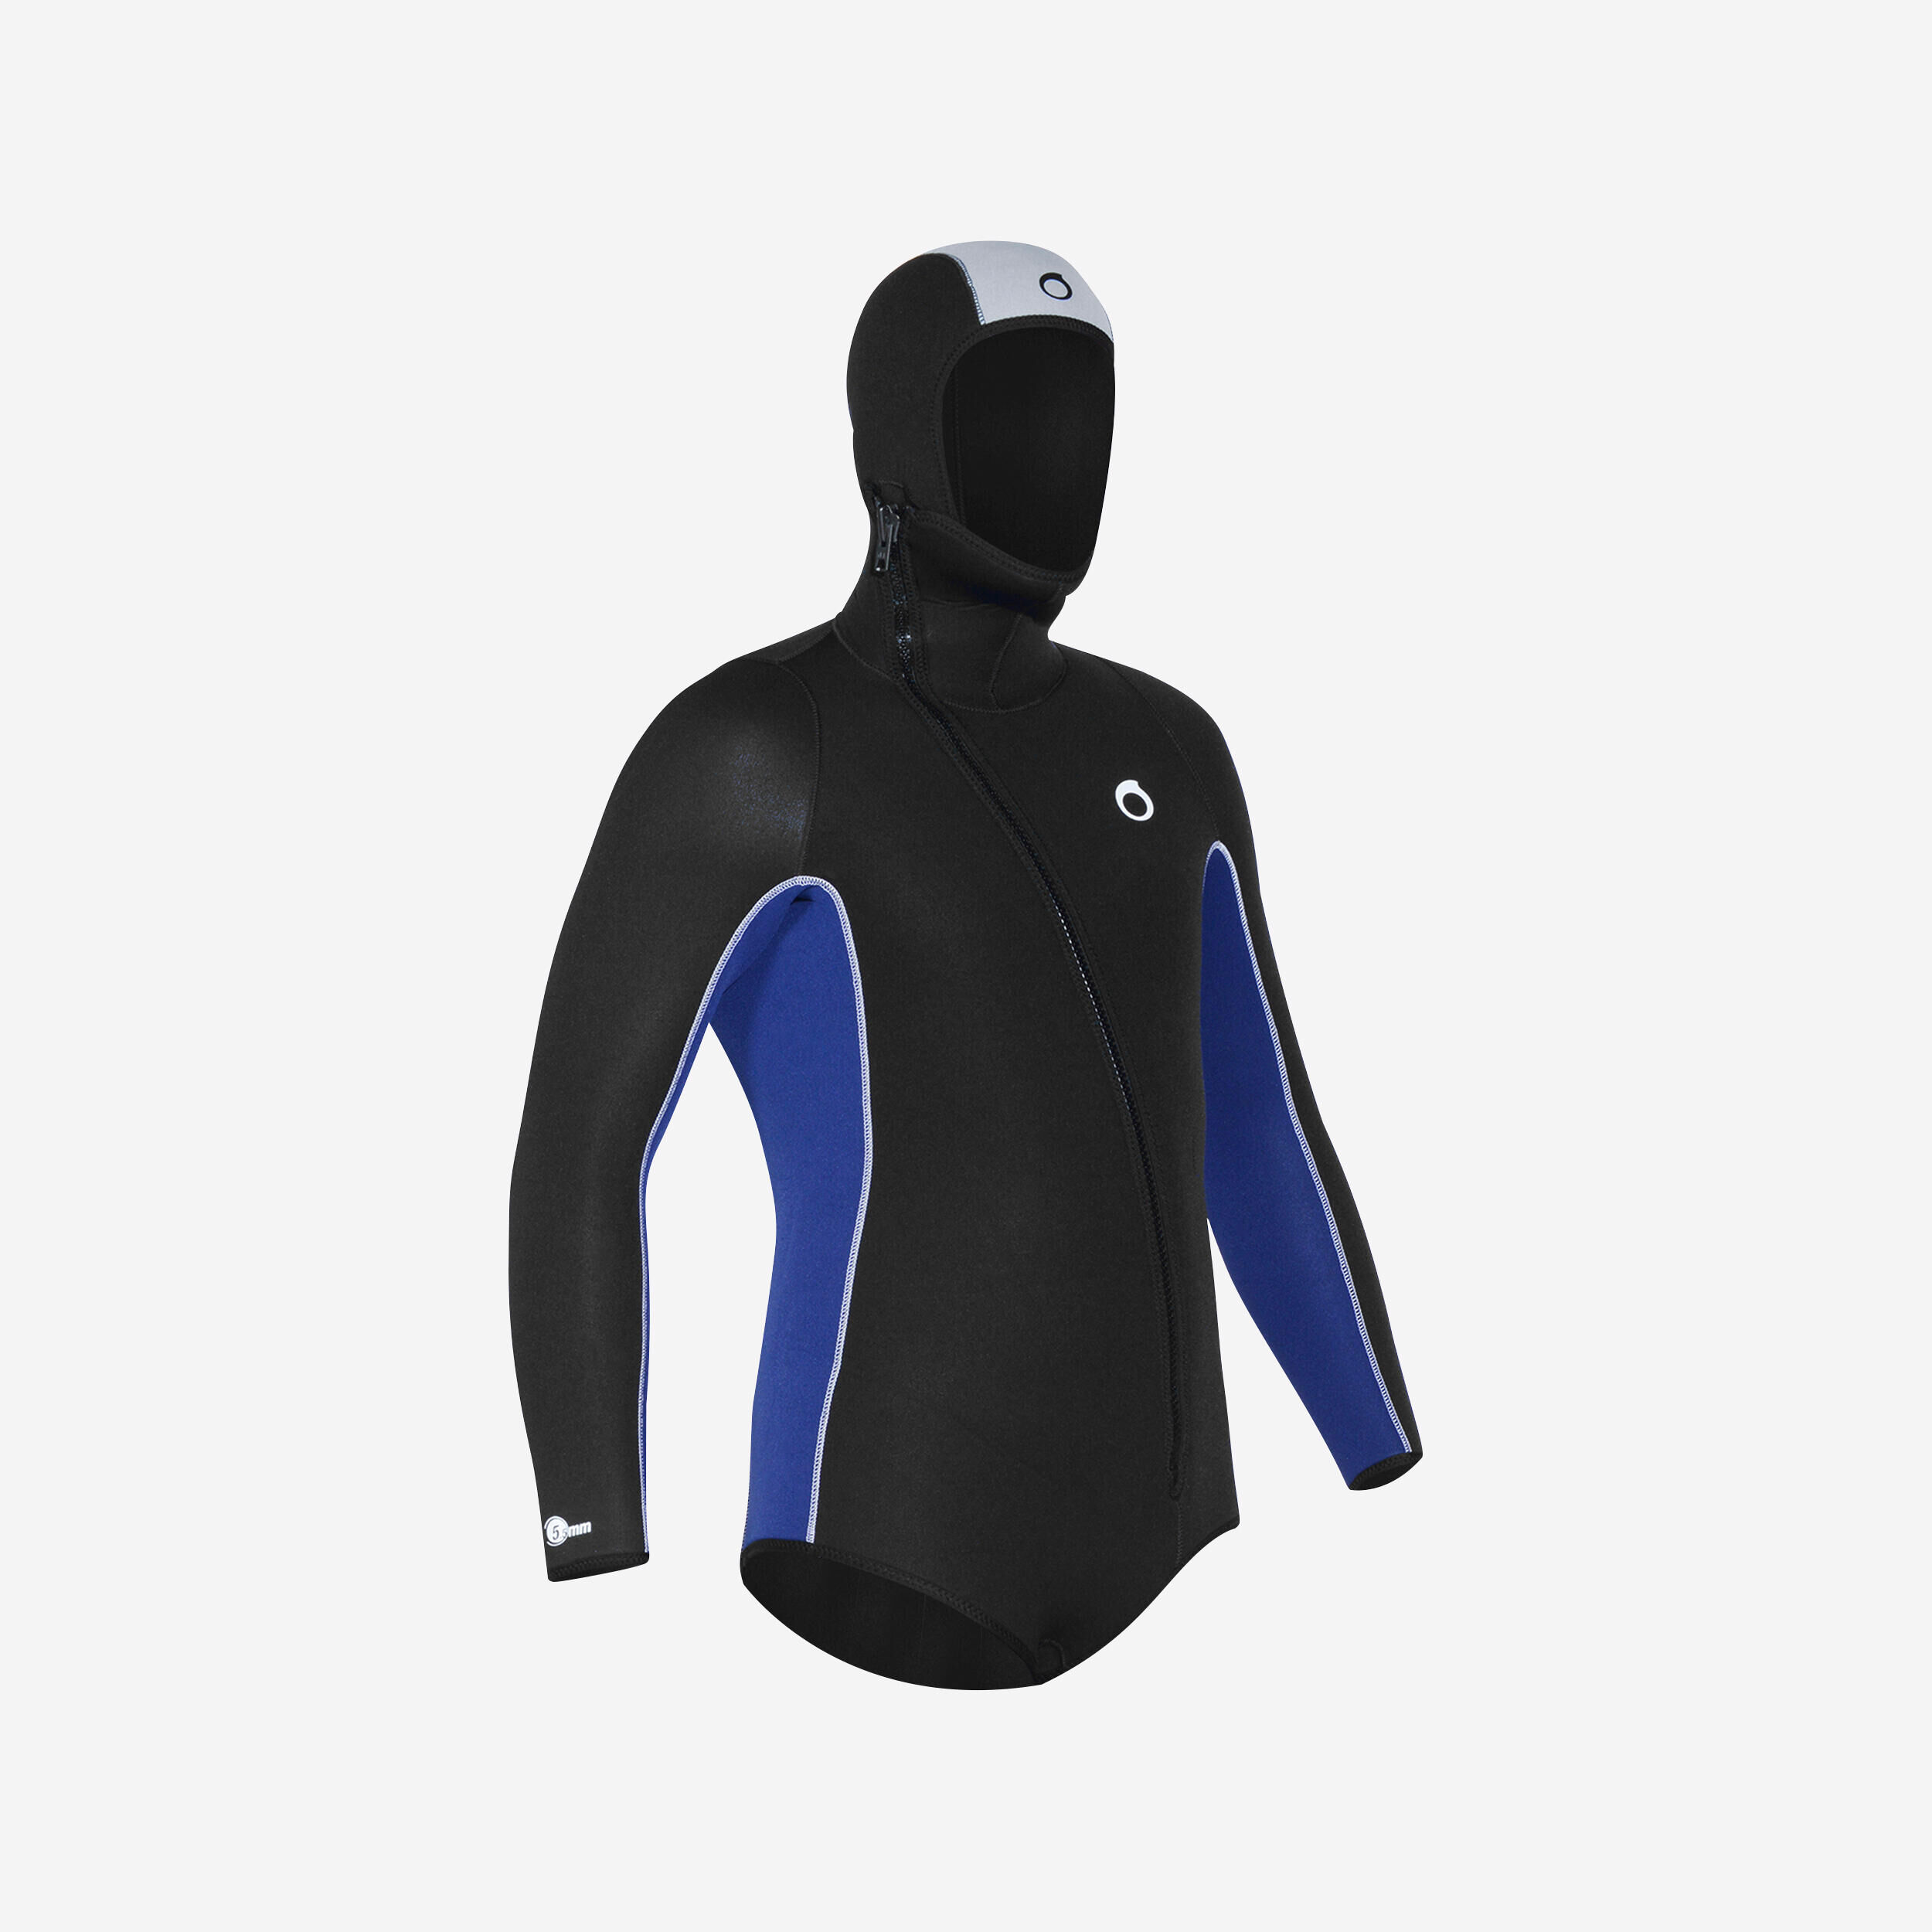 SUBEA Men’s diving jacket with hood 5.5 mm neoprene SCD black and blue